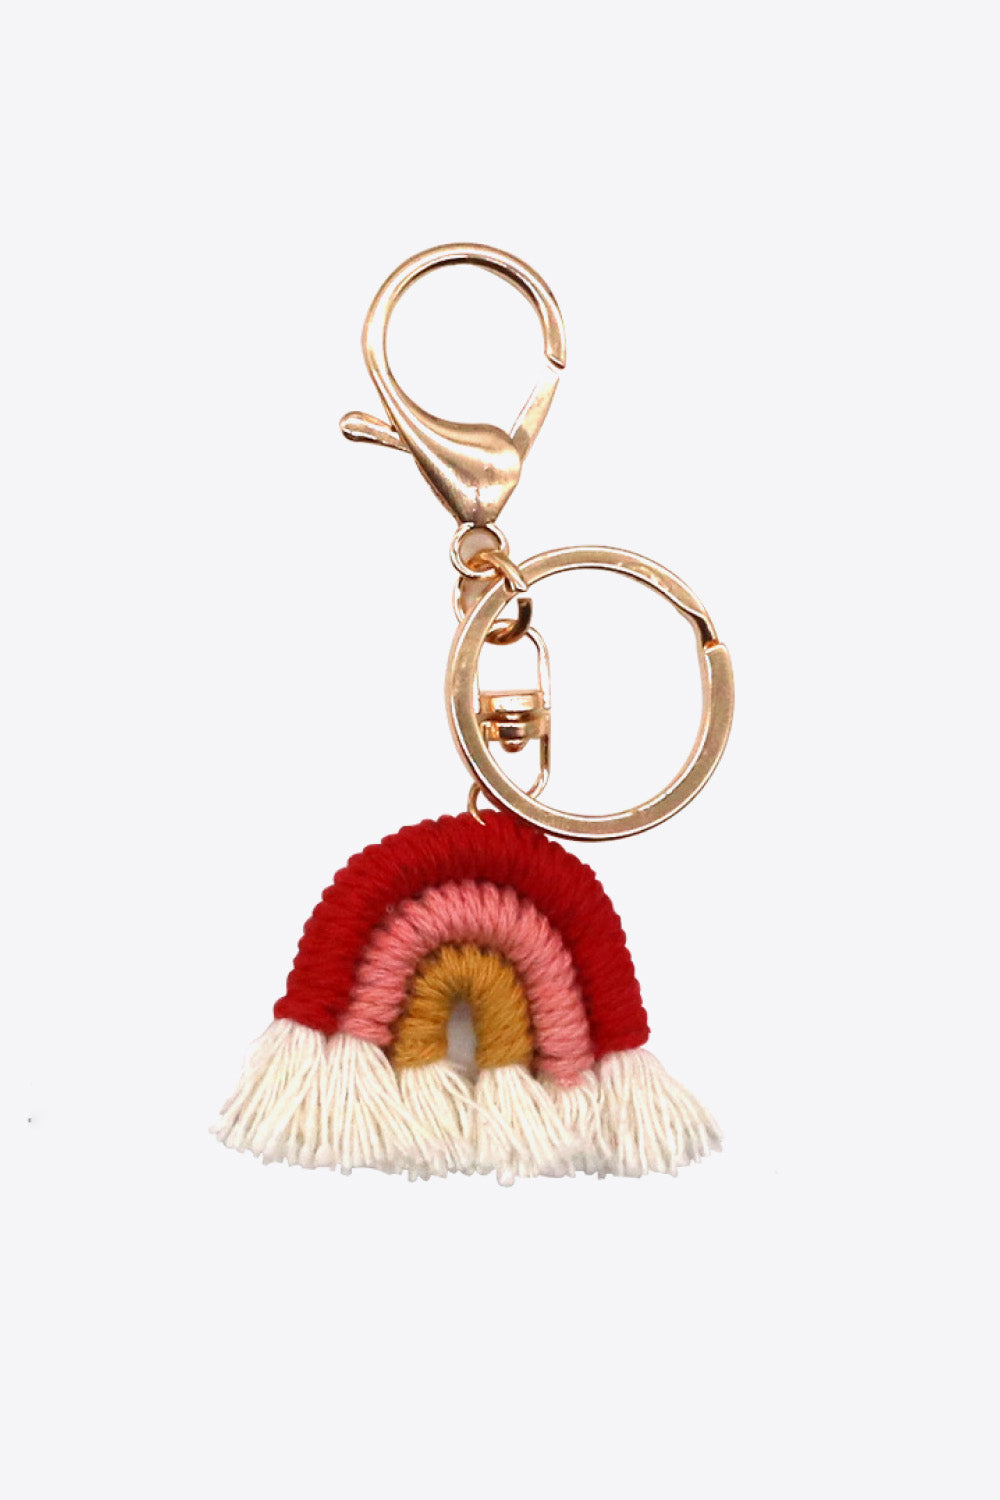 Trendsi Cupid Beauty Supplies Red/Pink/Mustard / One Size Keychains Assorted 4-Pack Rainbow Fringe Keychain